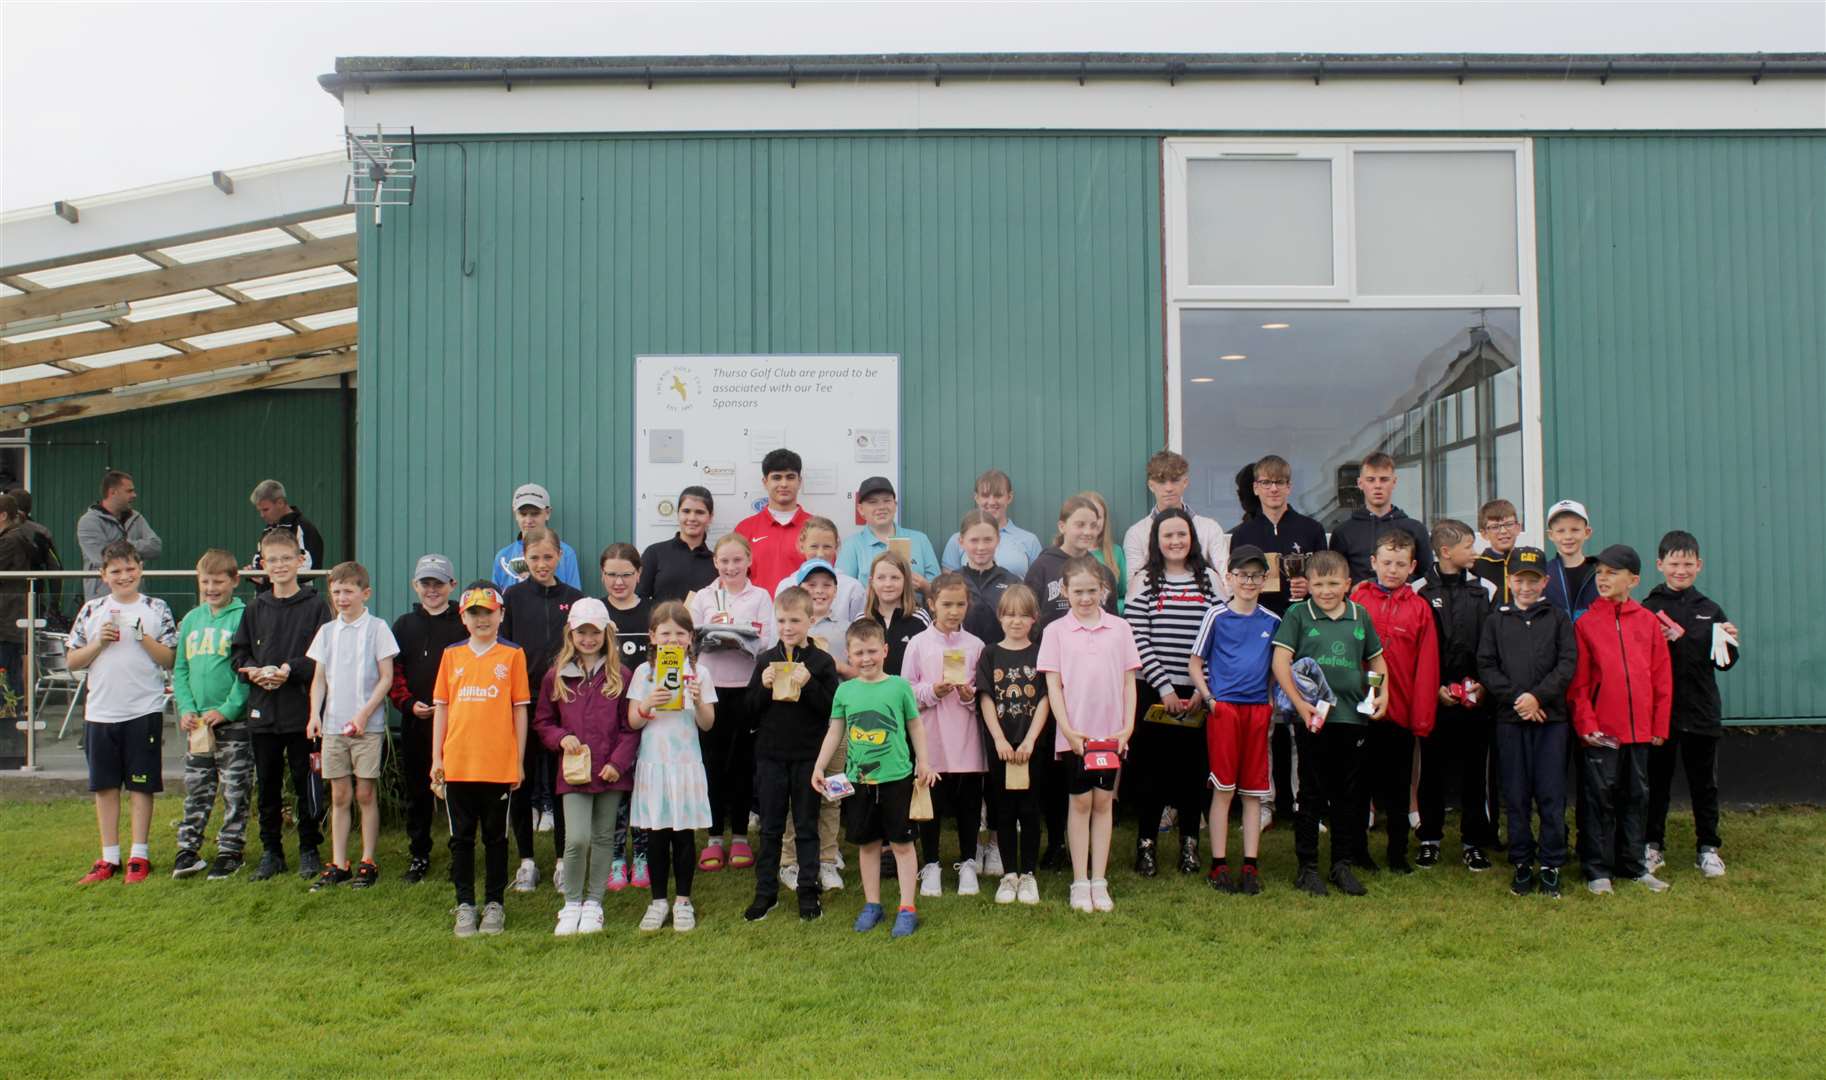 Competitors in Thurso Golf Club's annual junior open which was held on Sunday.